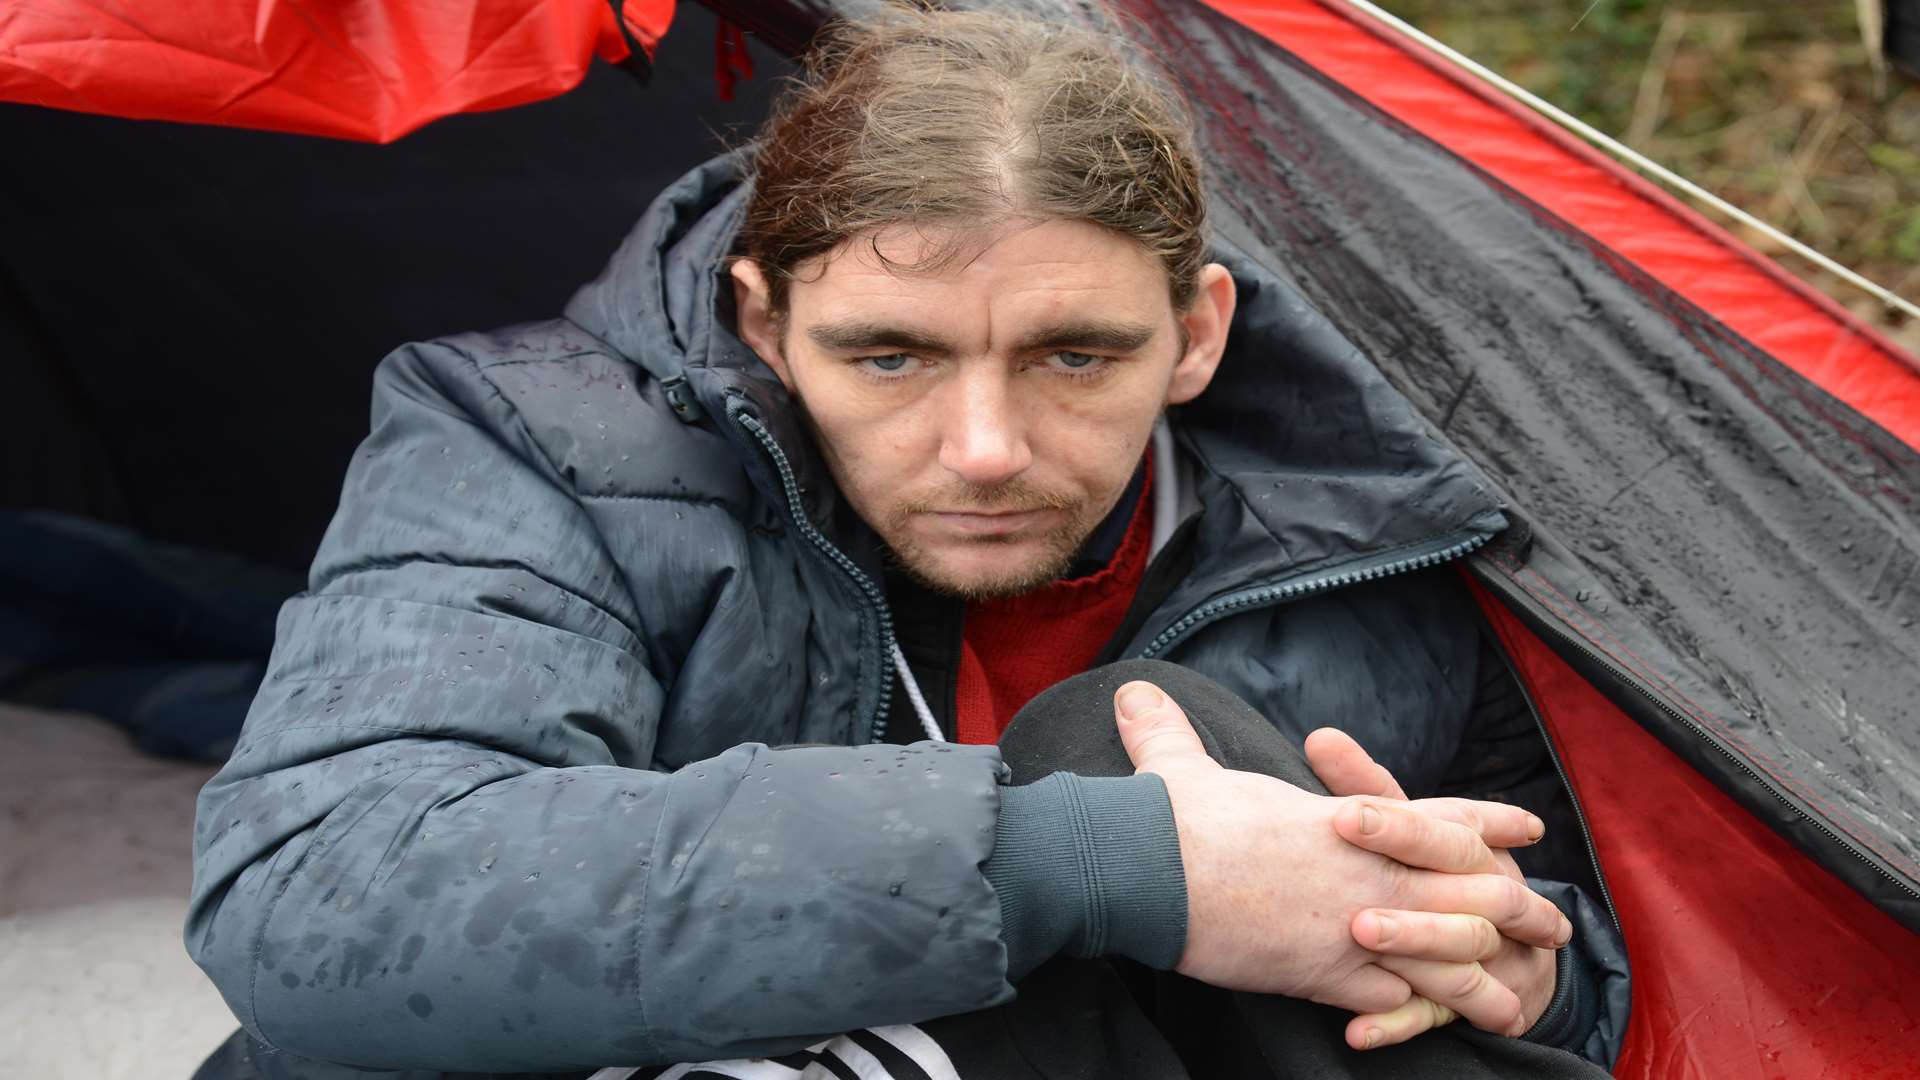 Jonathon Martin is living in a tent in Chatham